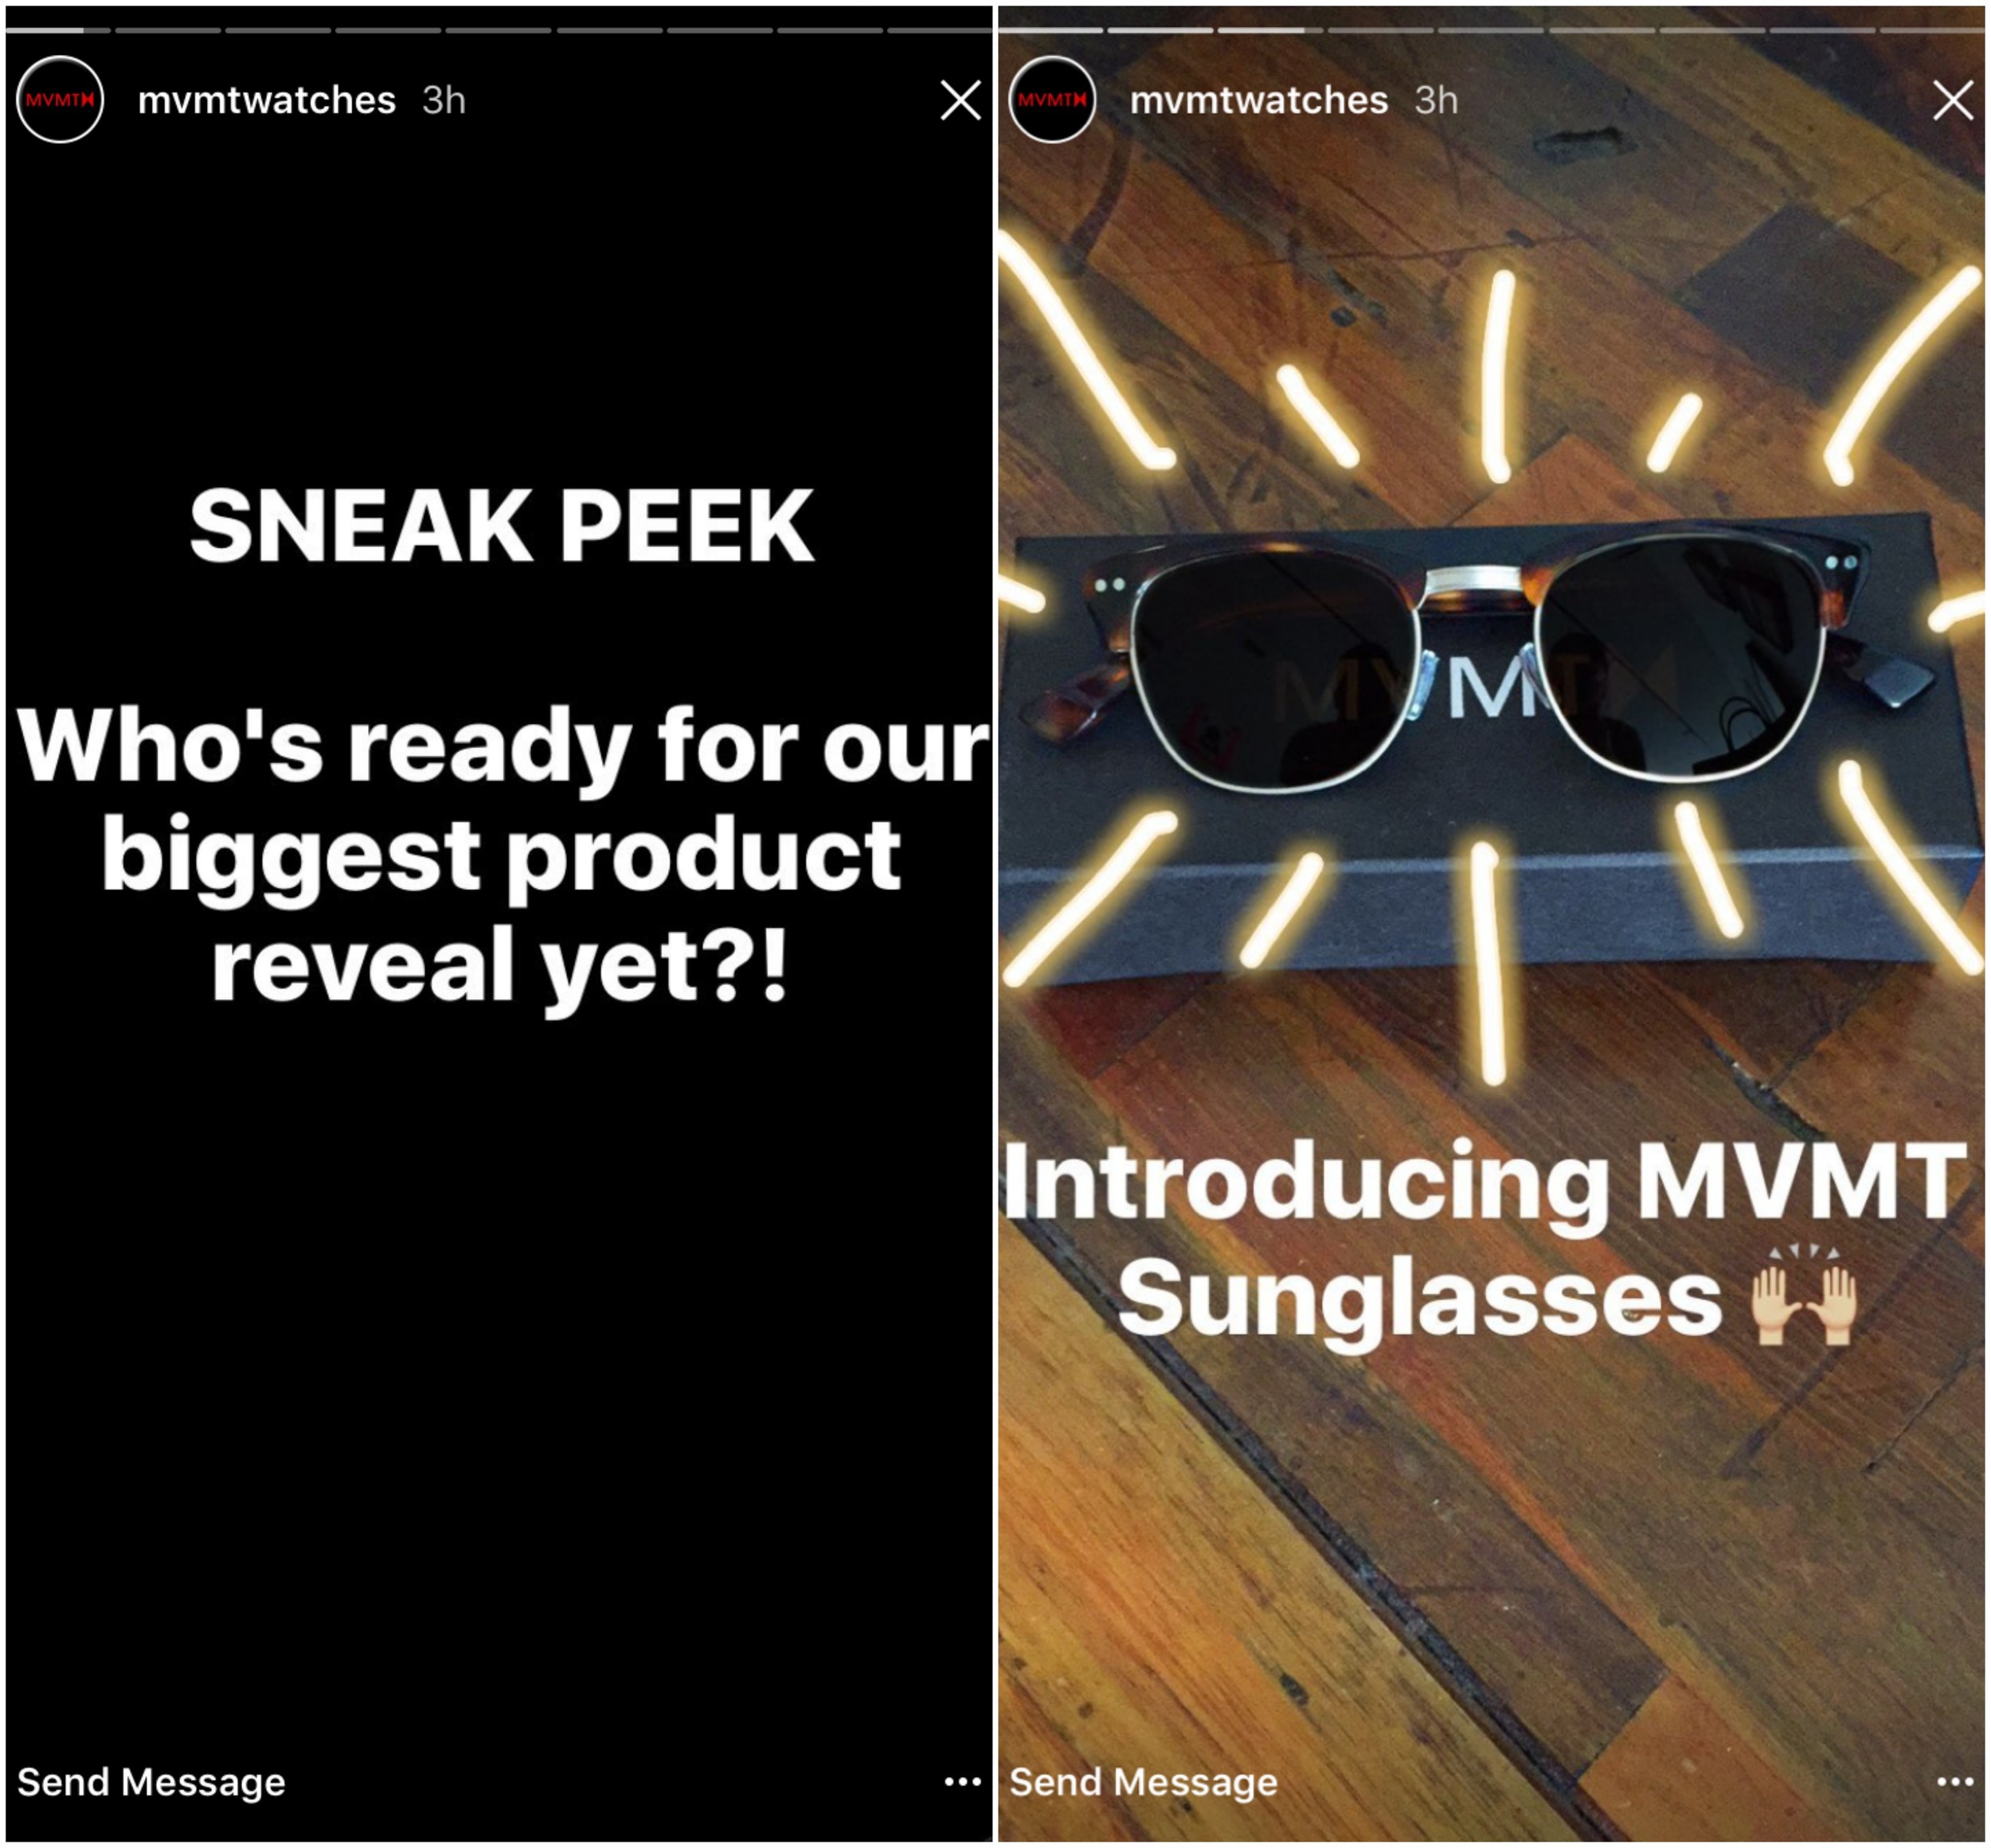 5 Unique Ways Brands are Using Instagram Stories | Social Media Today